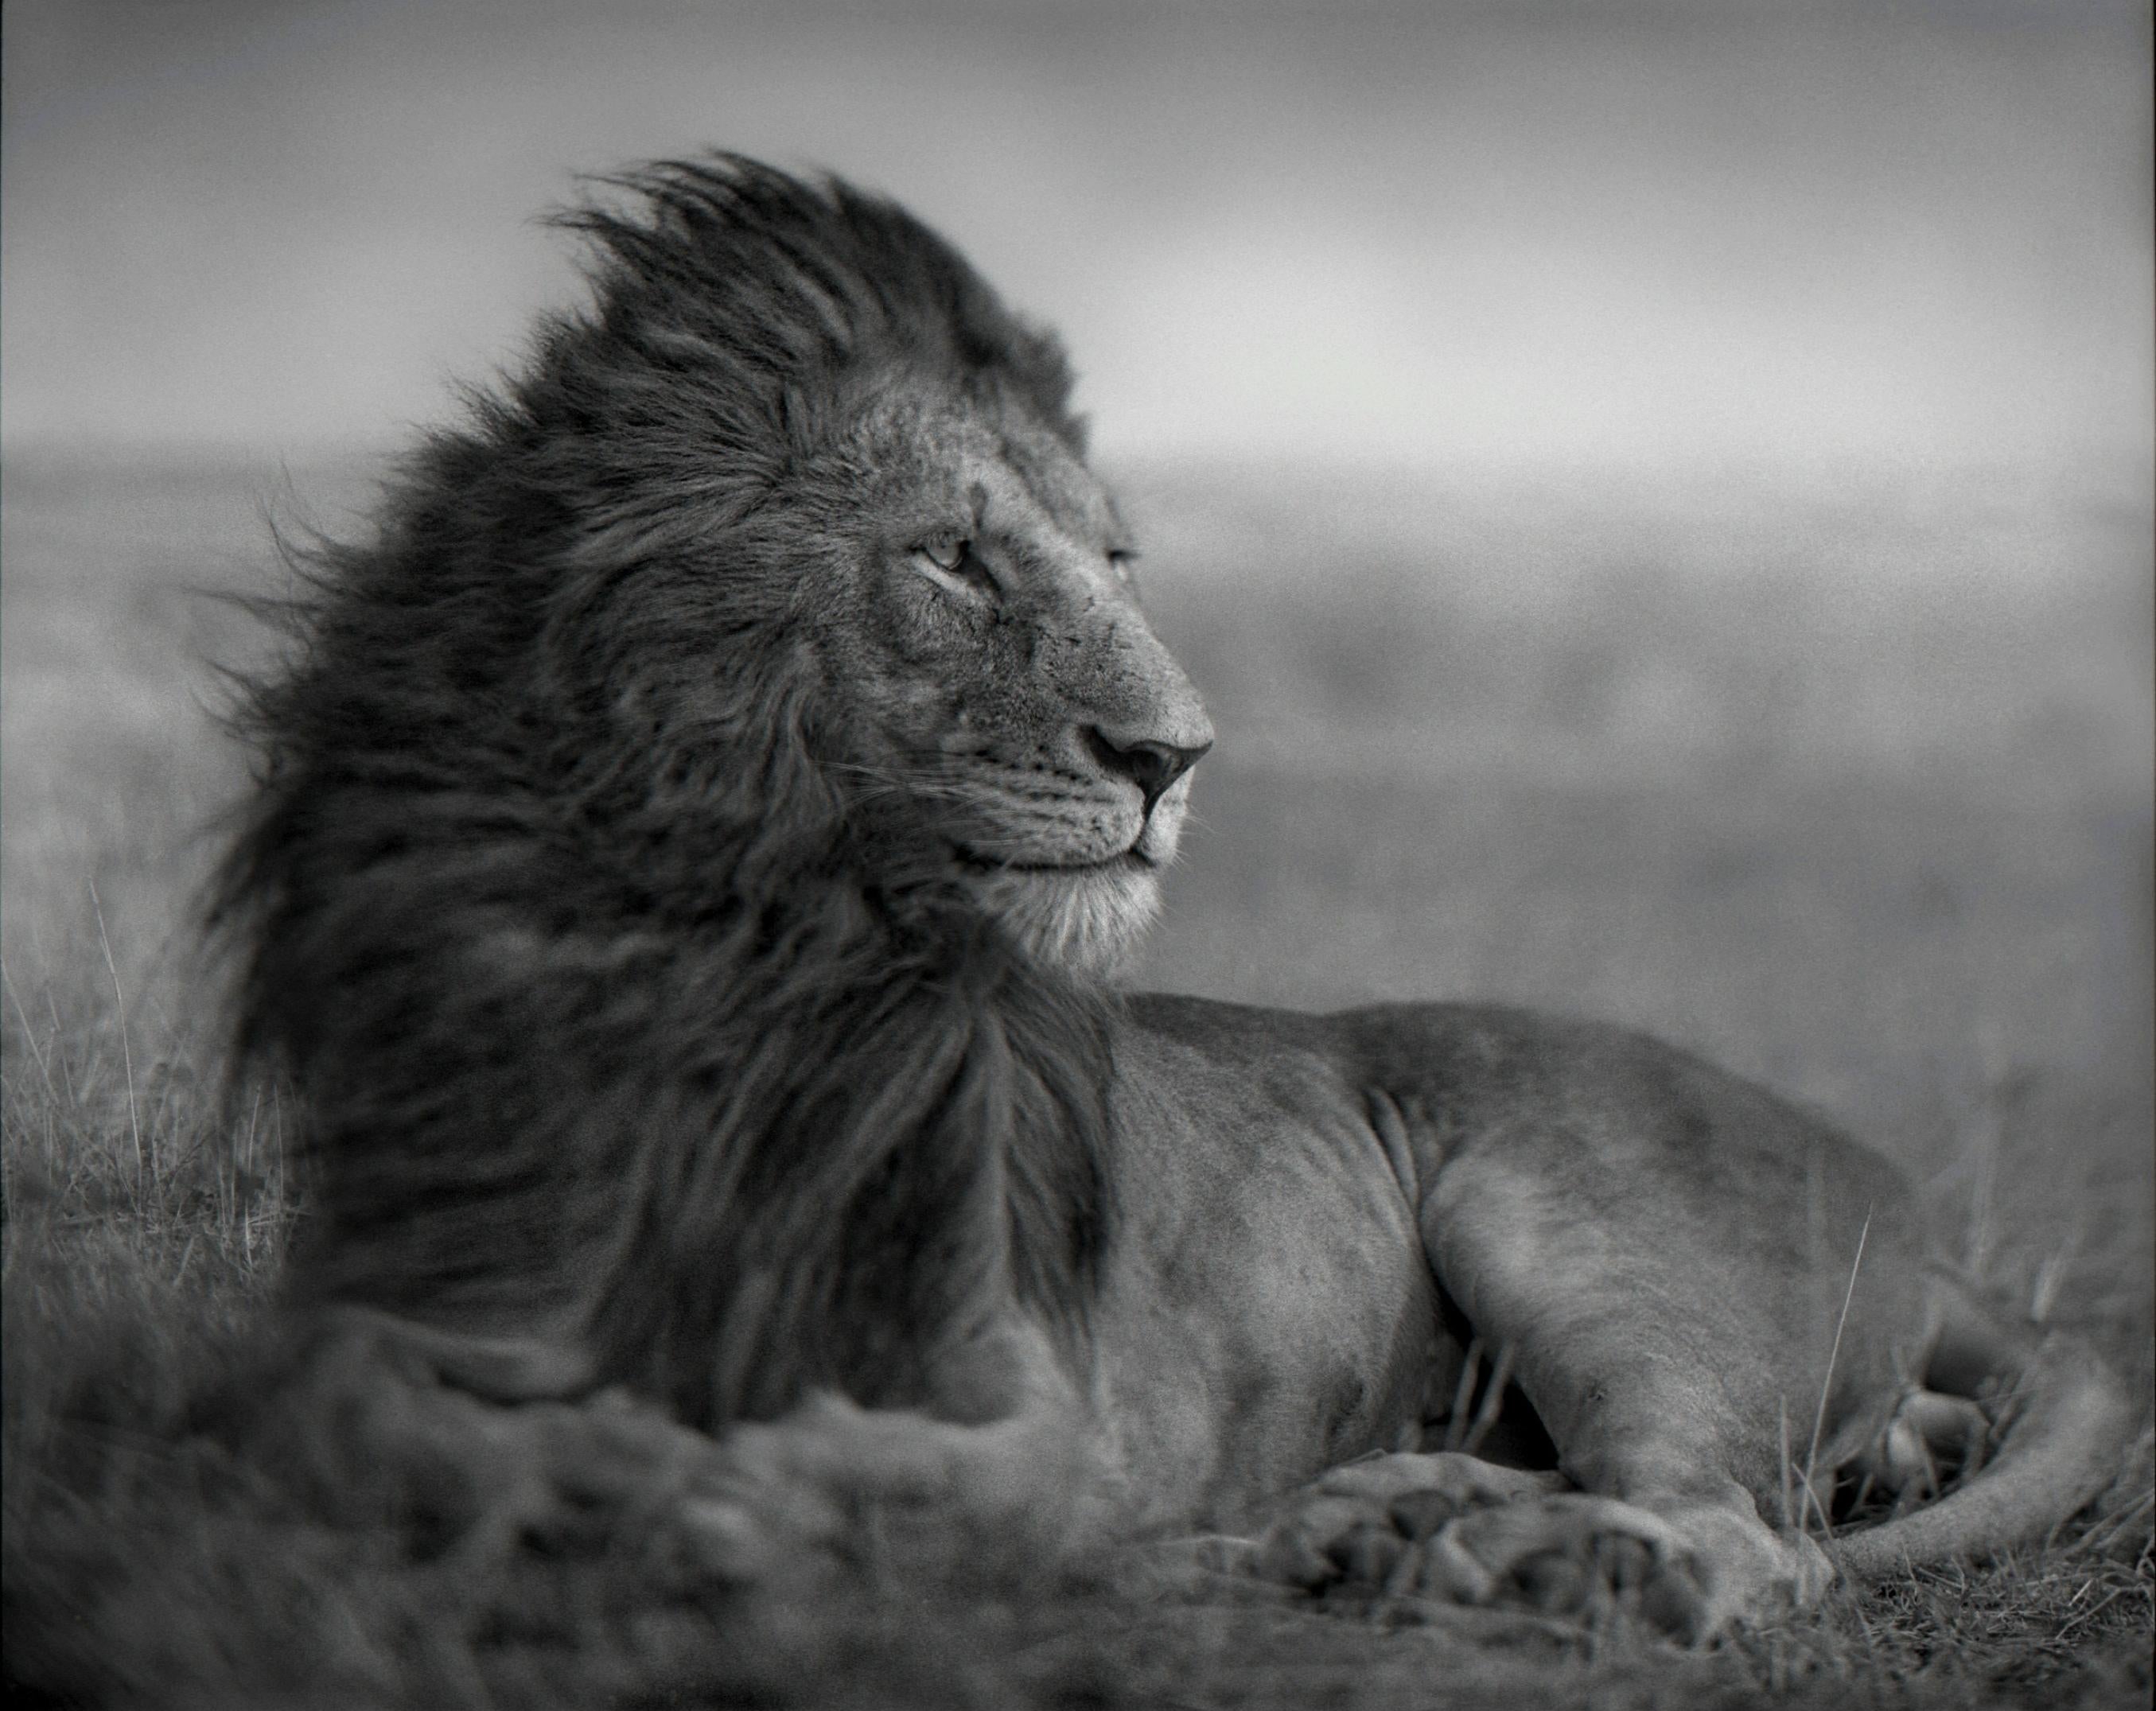 NICK BRANDT (*1966, England)
Lion Before Storm V, Maasai Mara, 2006
Platinum Print
Sheet 55.9 x 69.8 cm (22 x 27 1/2 in.) 
Edition of 8 plus AP's (from sold out edition)
Print only

Nick Brandt is a contemporary English photographer. His work